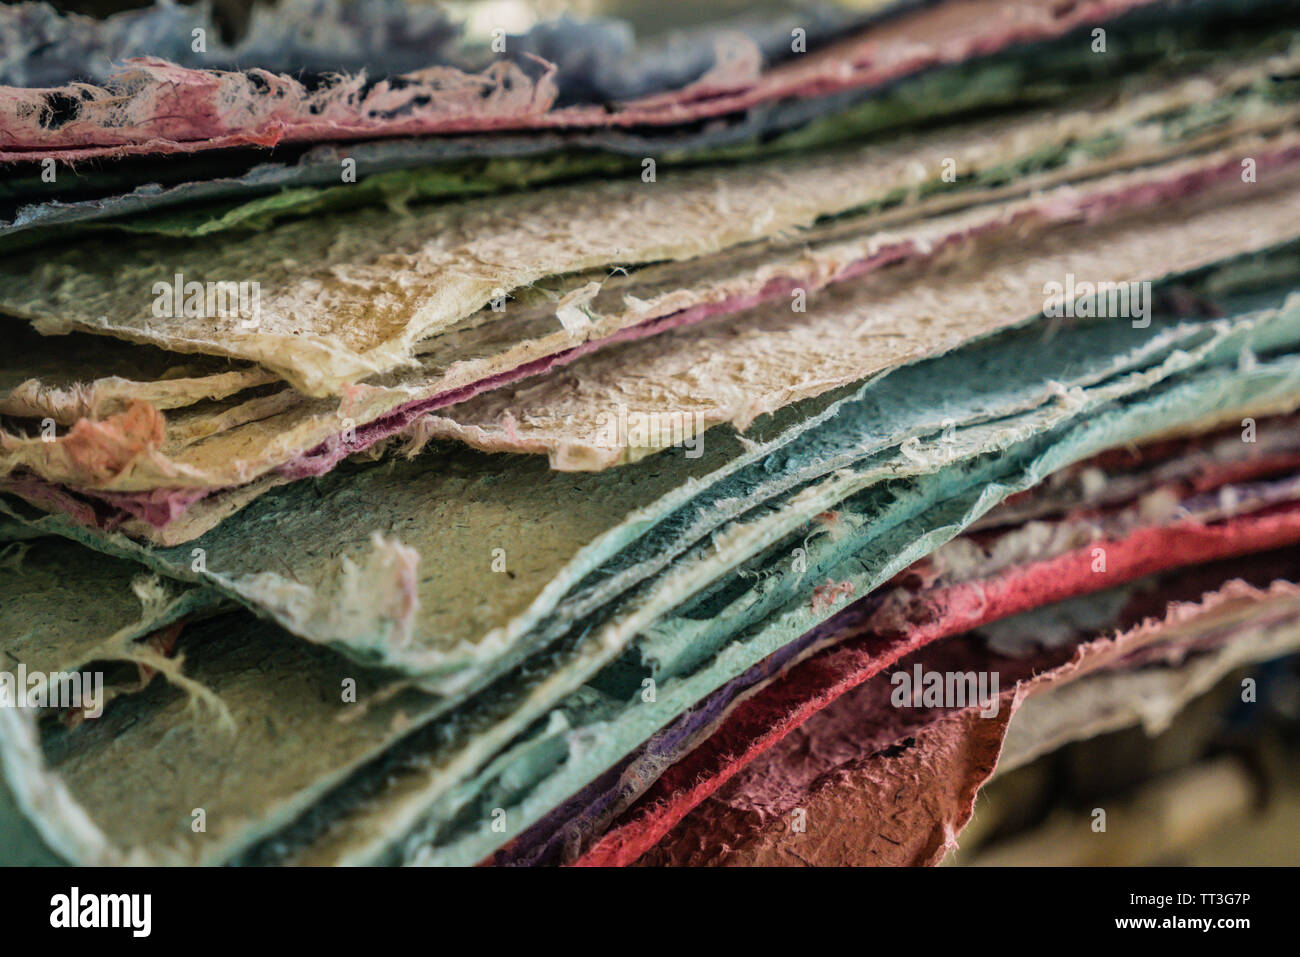 A stack of handmade paper from elephant poo Stock Photo